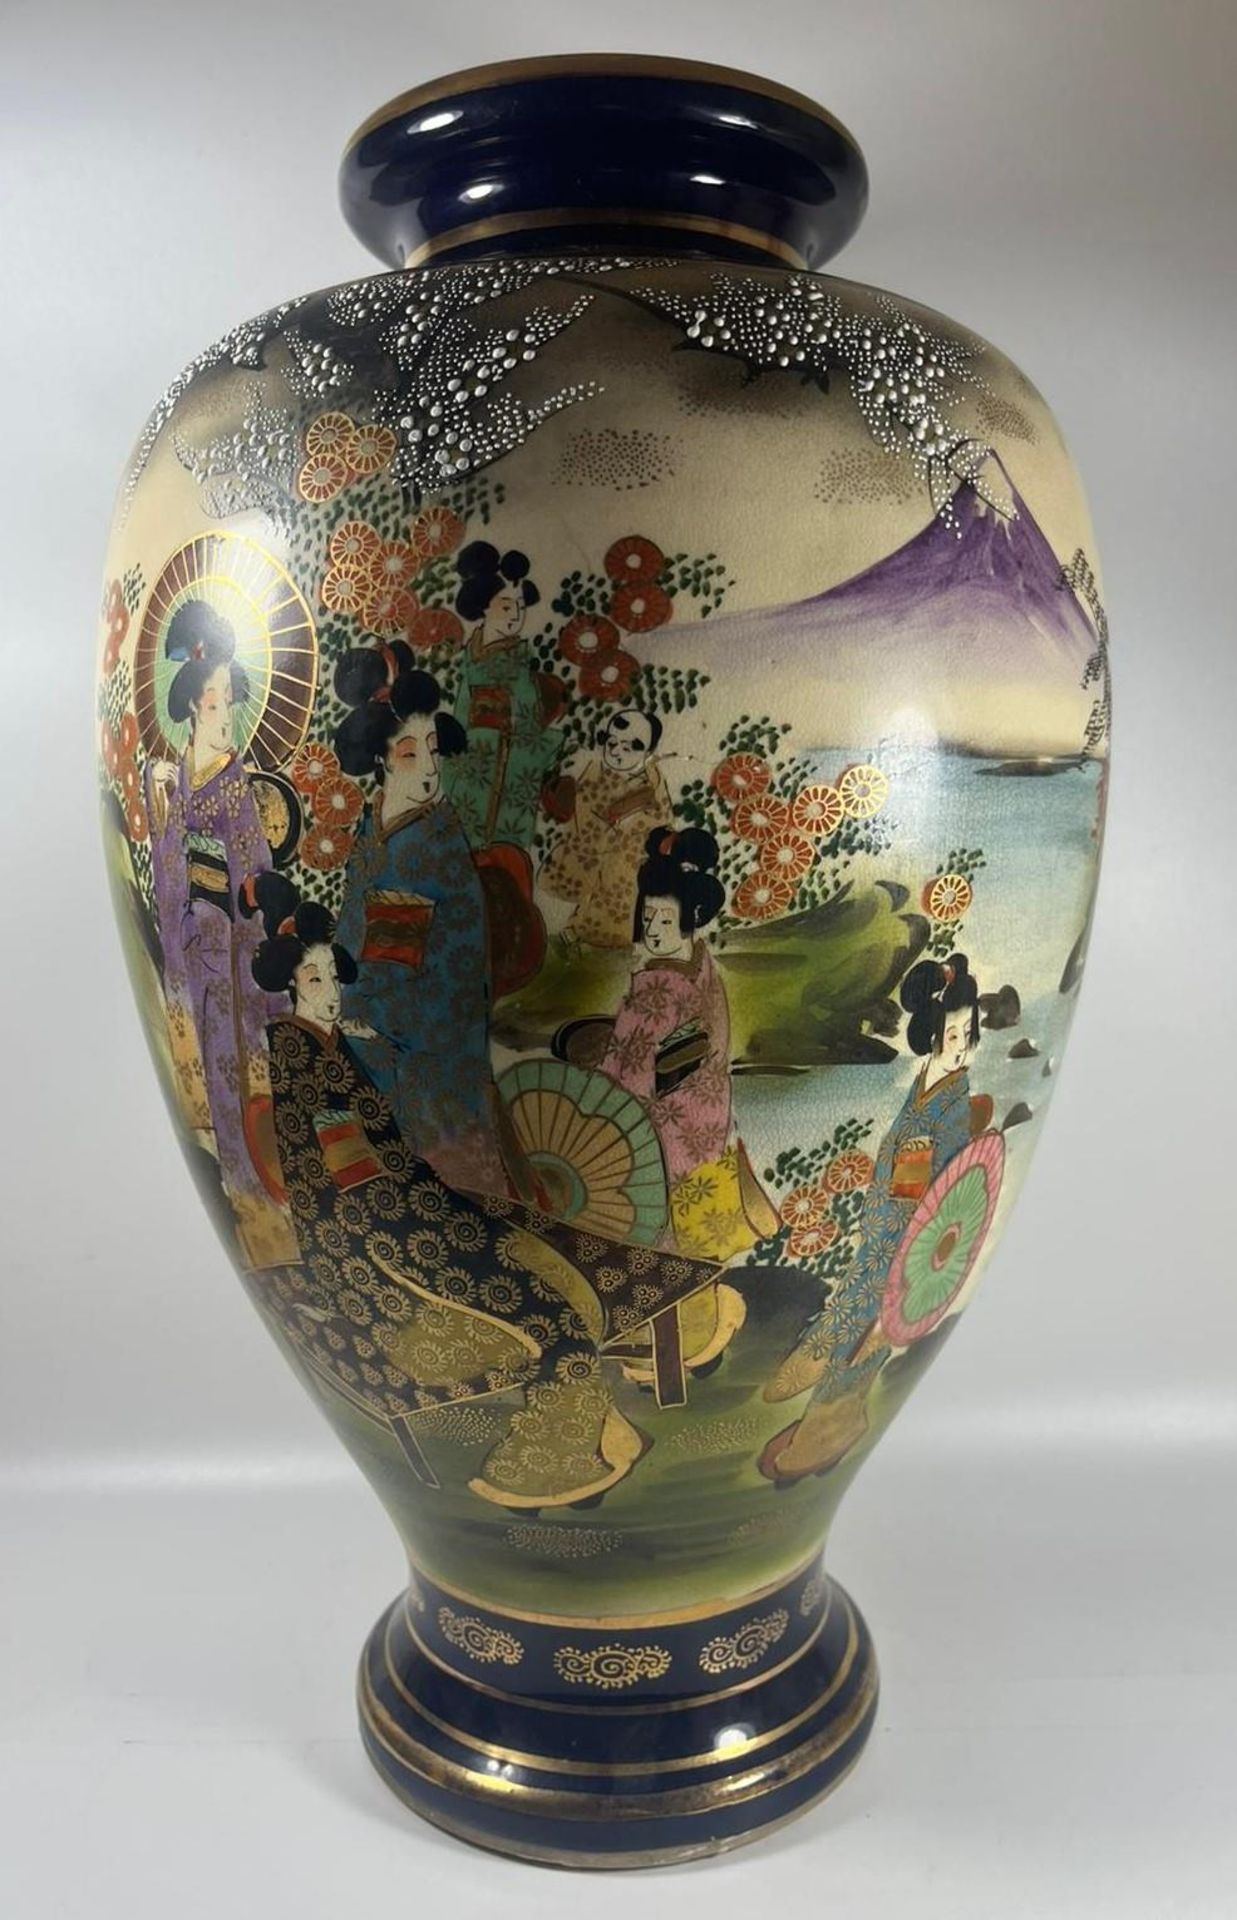 A HUGE ANTIQUE JAPANESE SATSUMA BALUSTER FORM VASE WITH HAND PAINTED FIGURAL SCENES WITH GILT BANDED